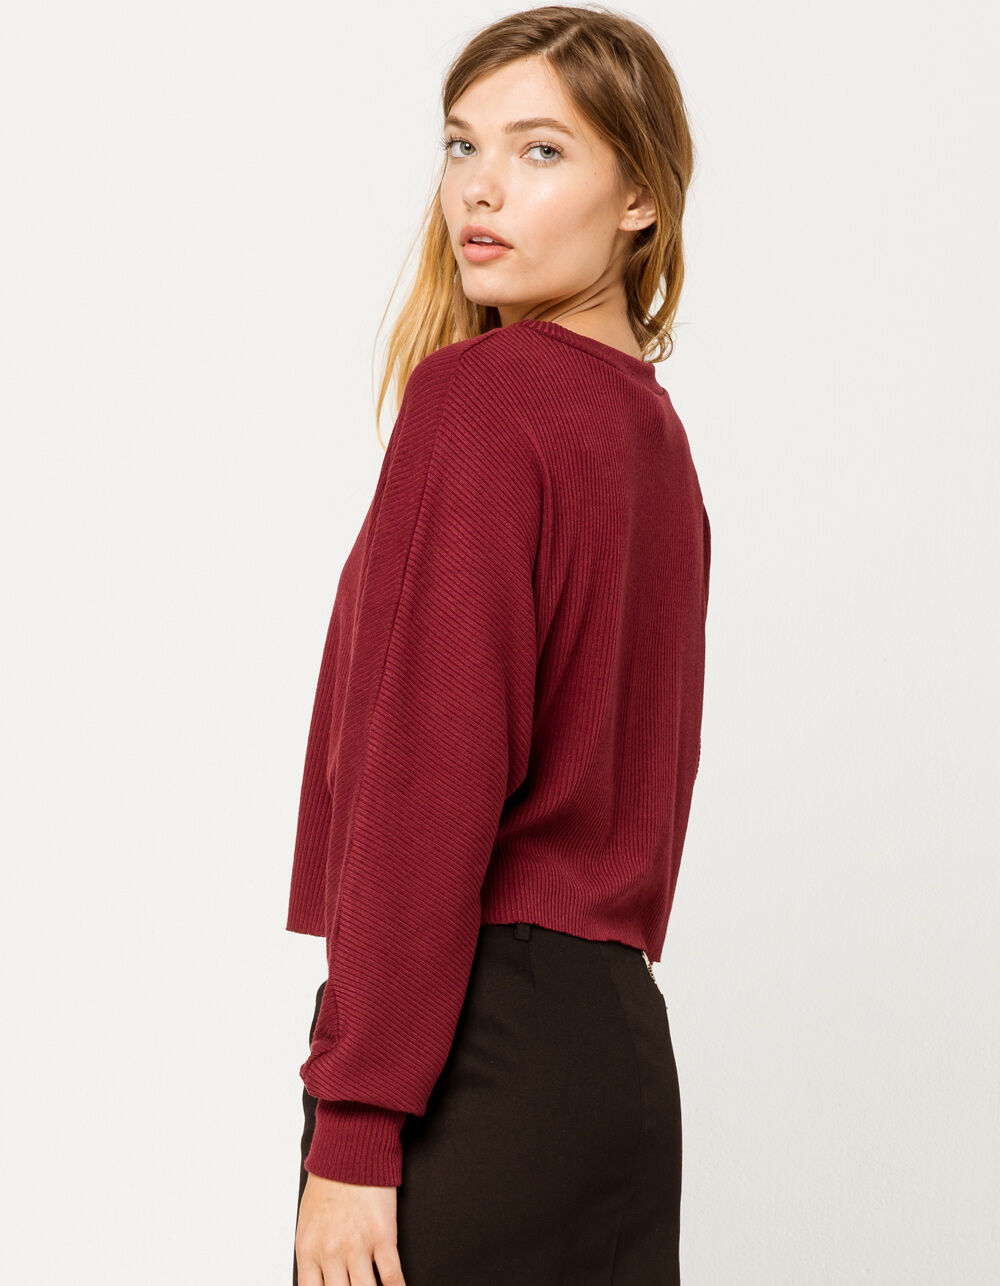 SKY AND SPARROW Ribbed Dolman Wine Womens Tee - WINE | Tillys